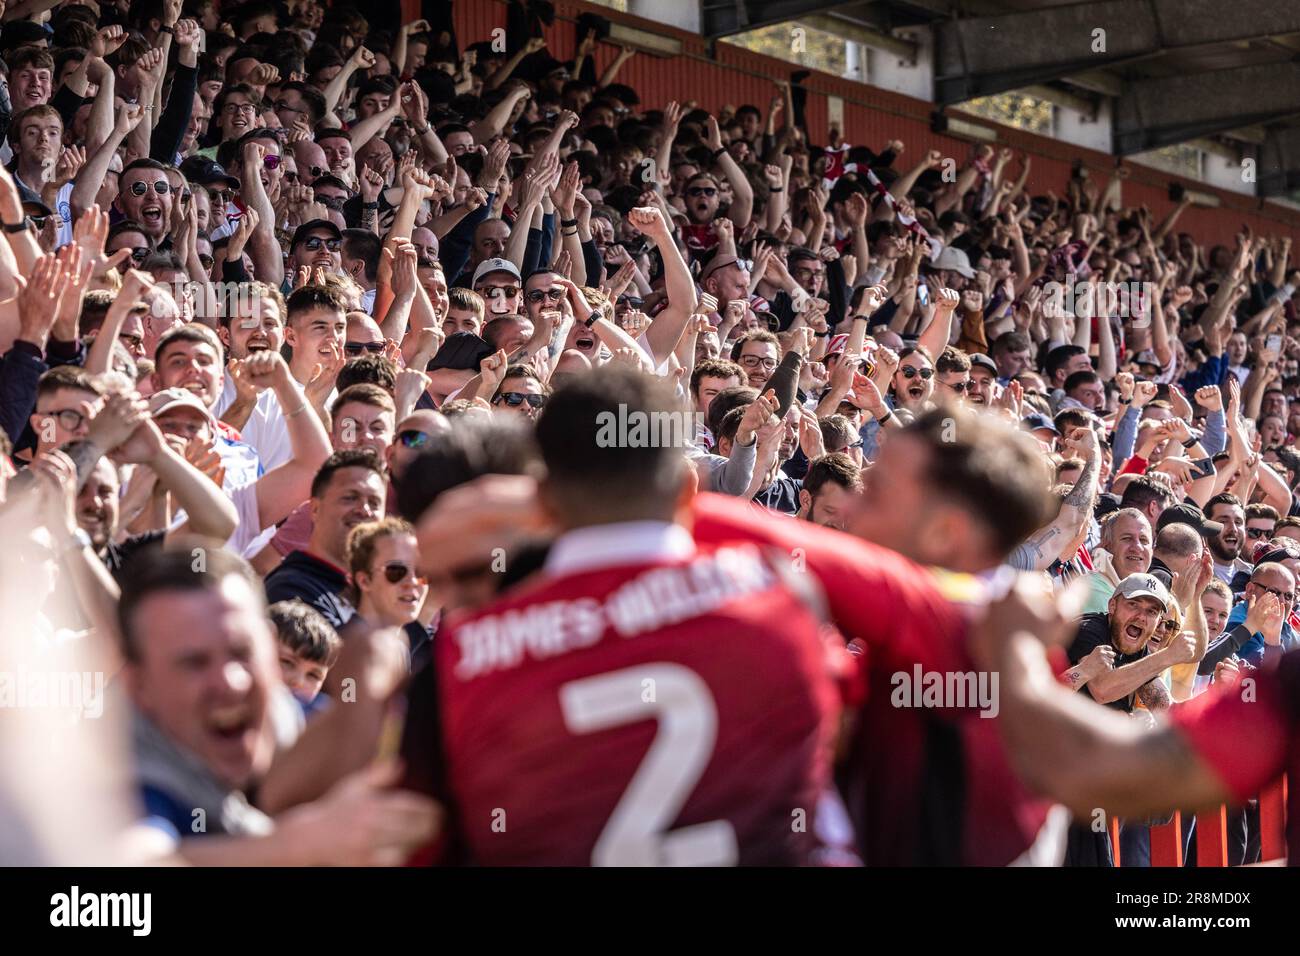 Football / soccer players celebrating scoring goal with fans and supporters. Stock Photo